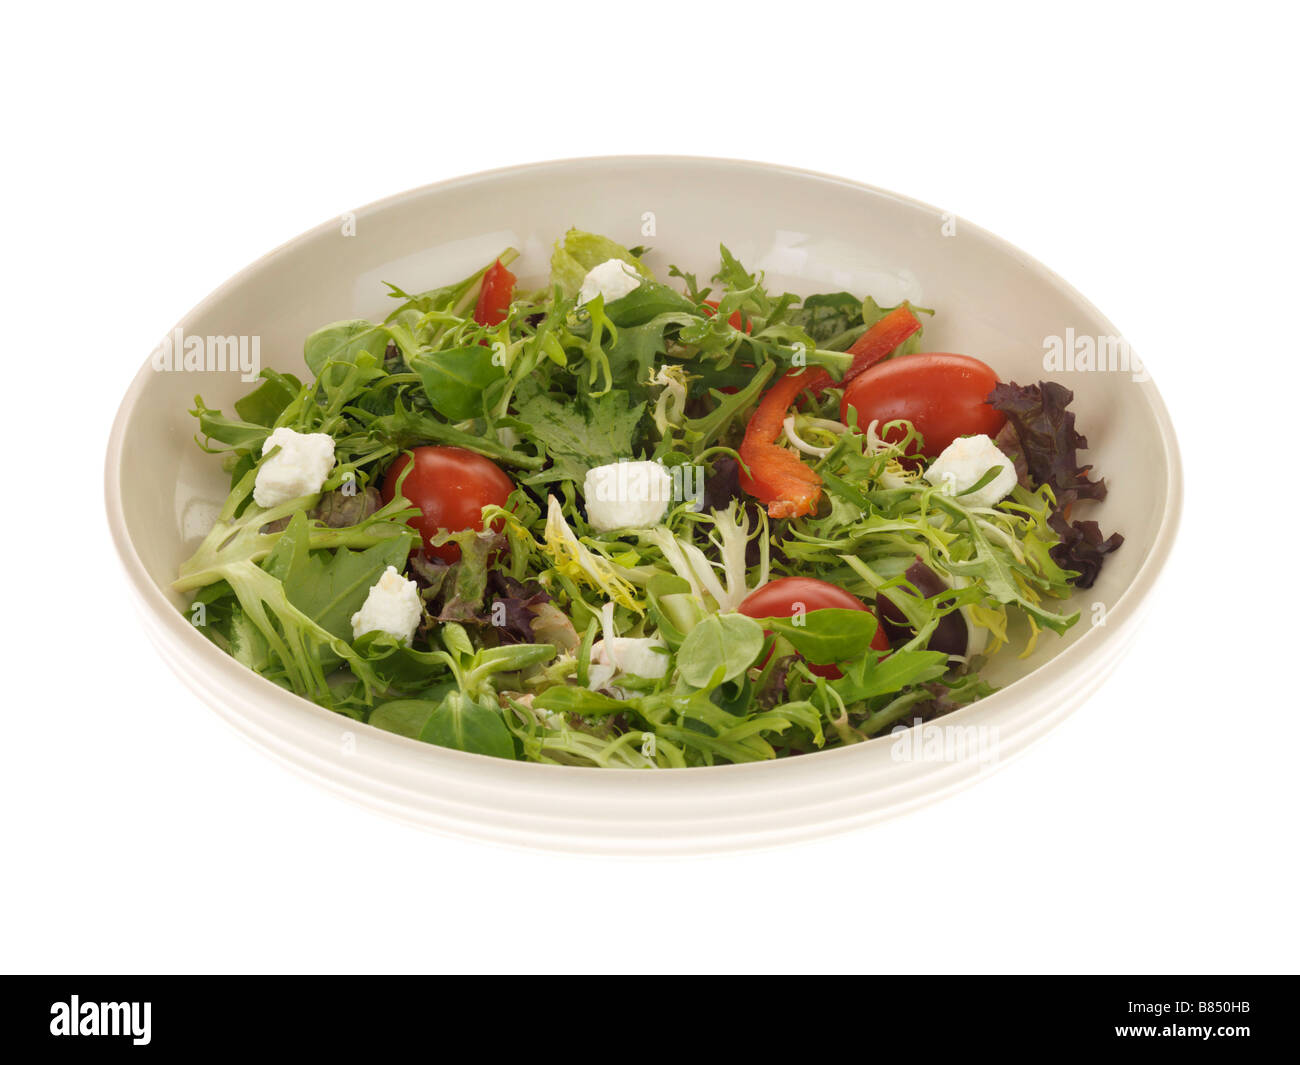 Fresh Healthy Mixed Salad With Feta Cheese Served On A Plate Isolated Against A White Background With No People And A Clipping Path Stock Photo